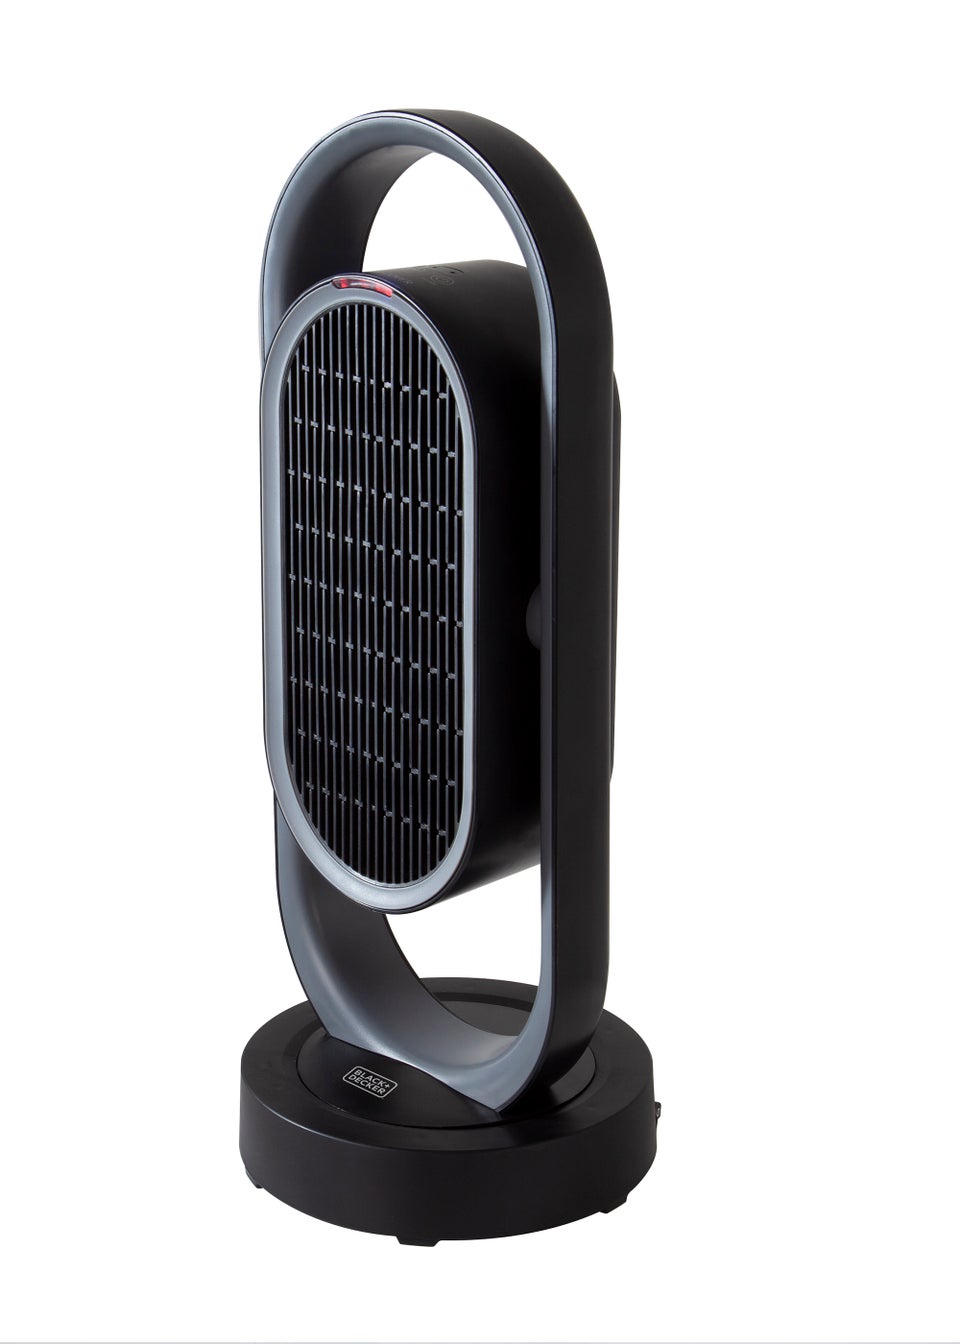 Black and Decker 1.8KW Ceramic Heater with Timer Black